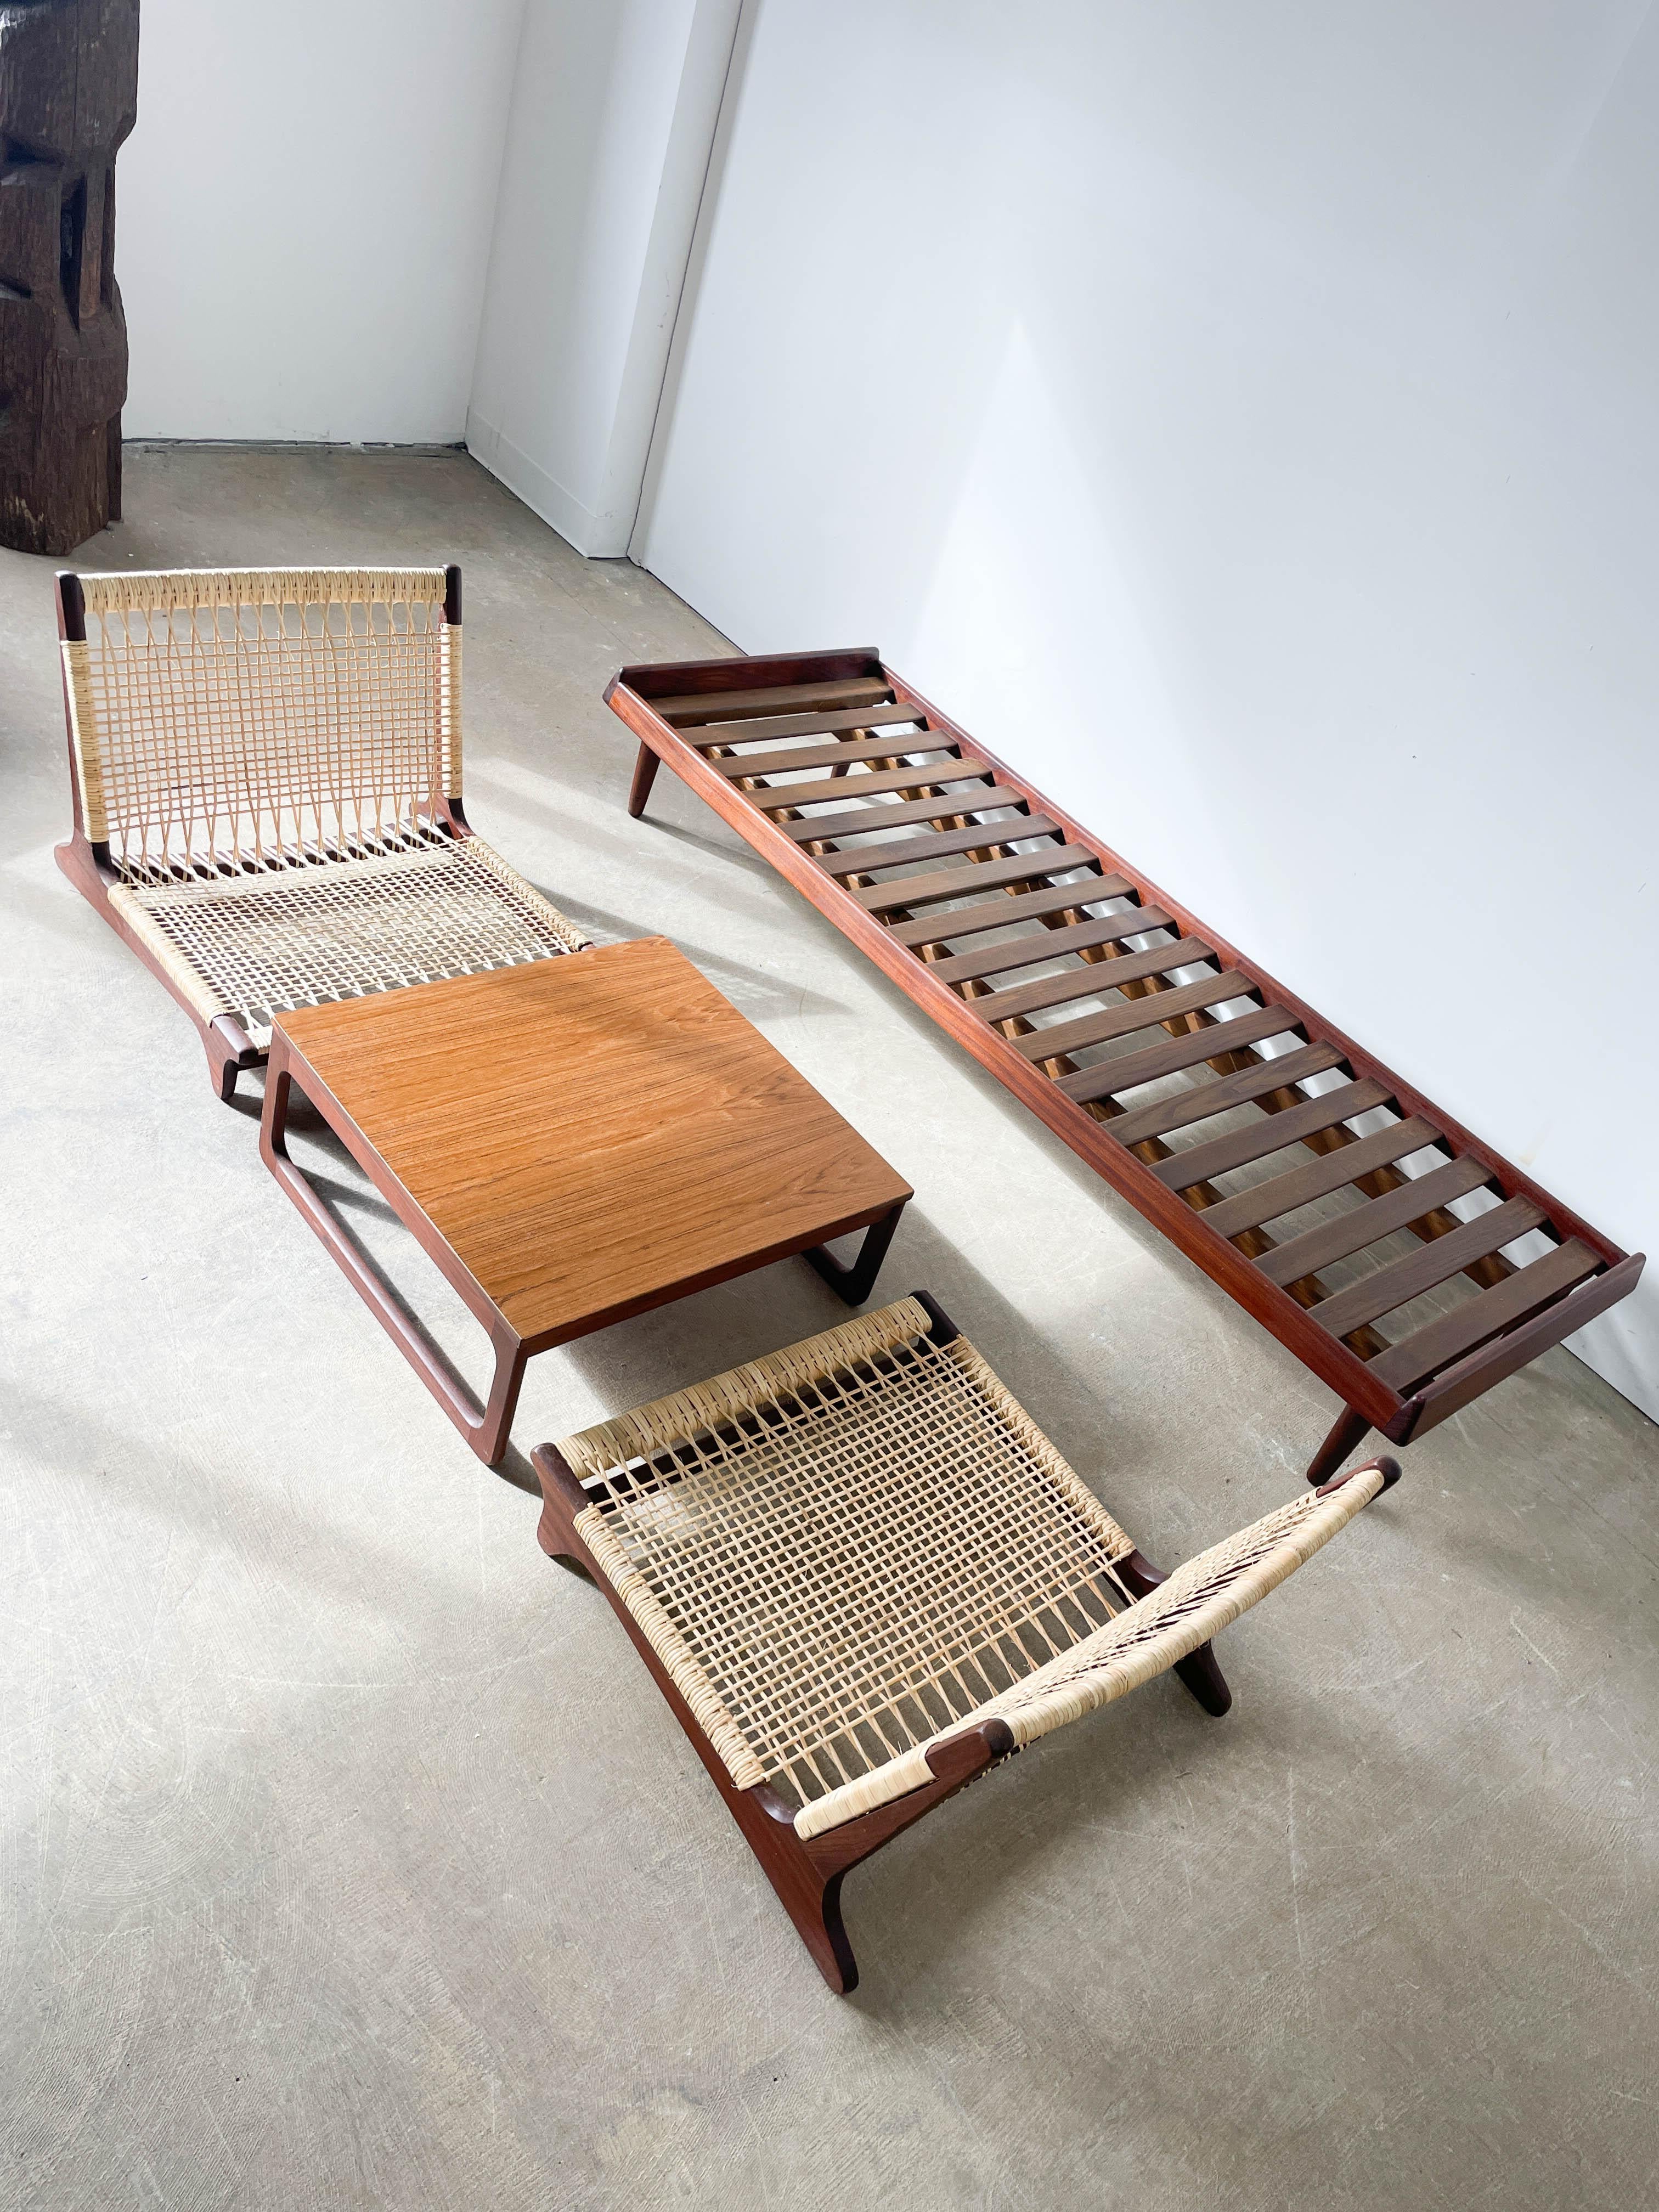 Modular seating set designed by Hans Olsen and made by Bramin in the 1950s. Solid teak / Afrormosia frames with intricately woven cane seats. Totaly modular system means components can be arranged in a wide range of variations: seats next to each